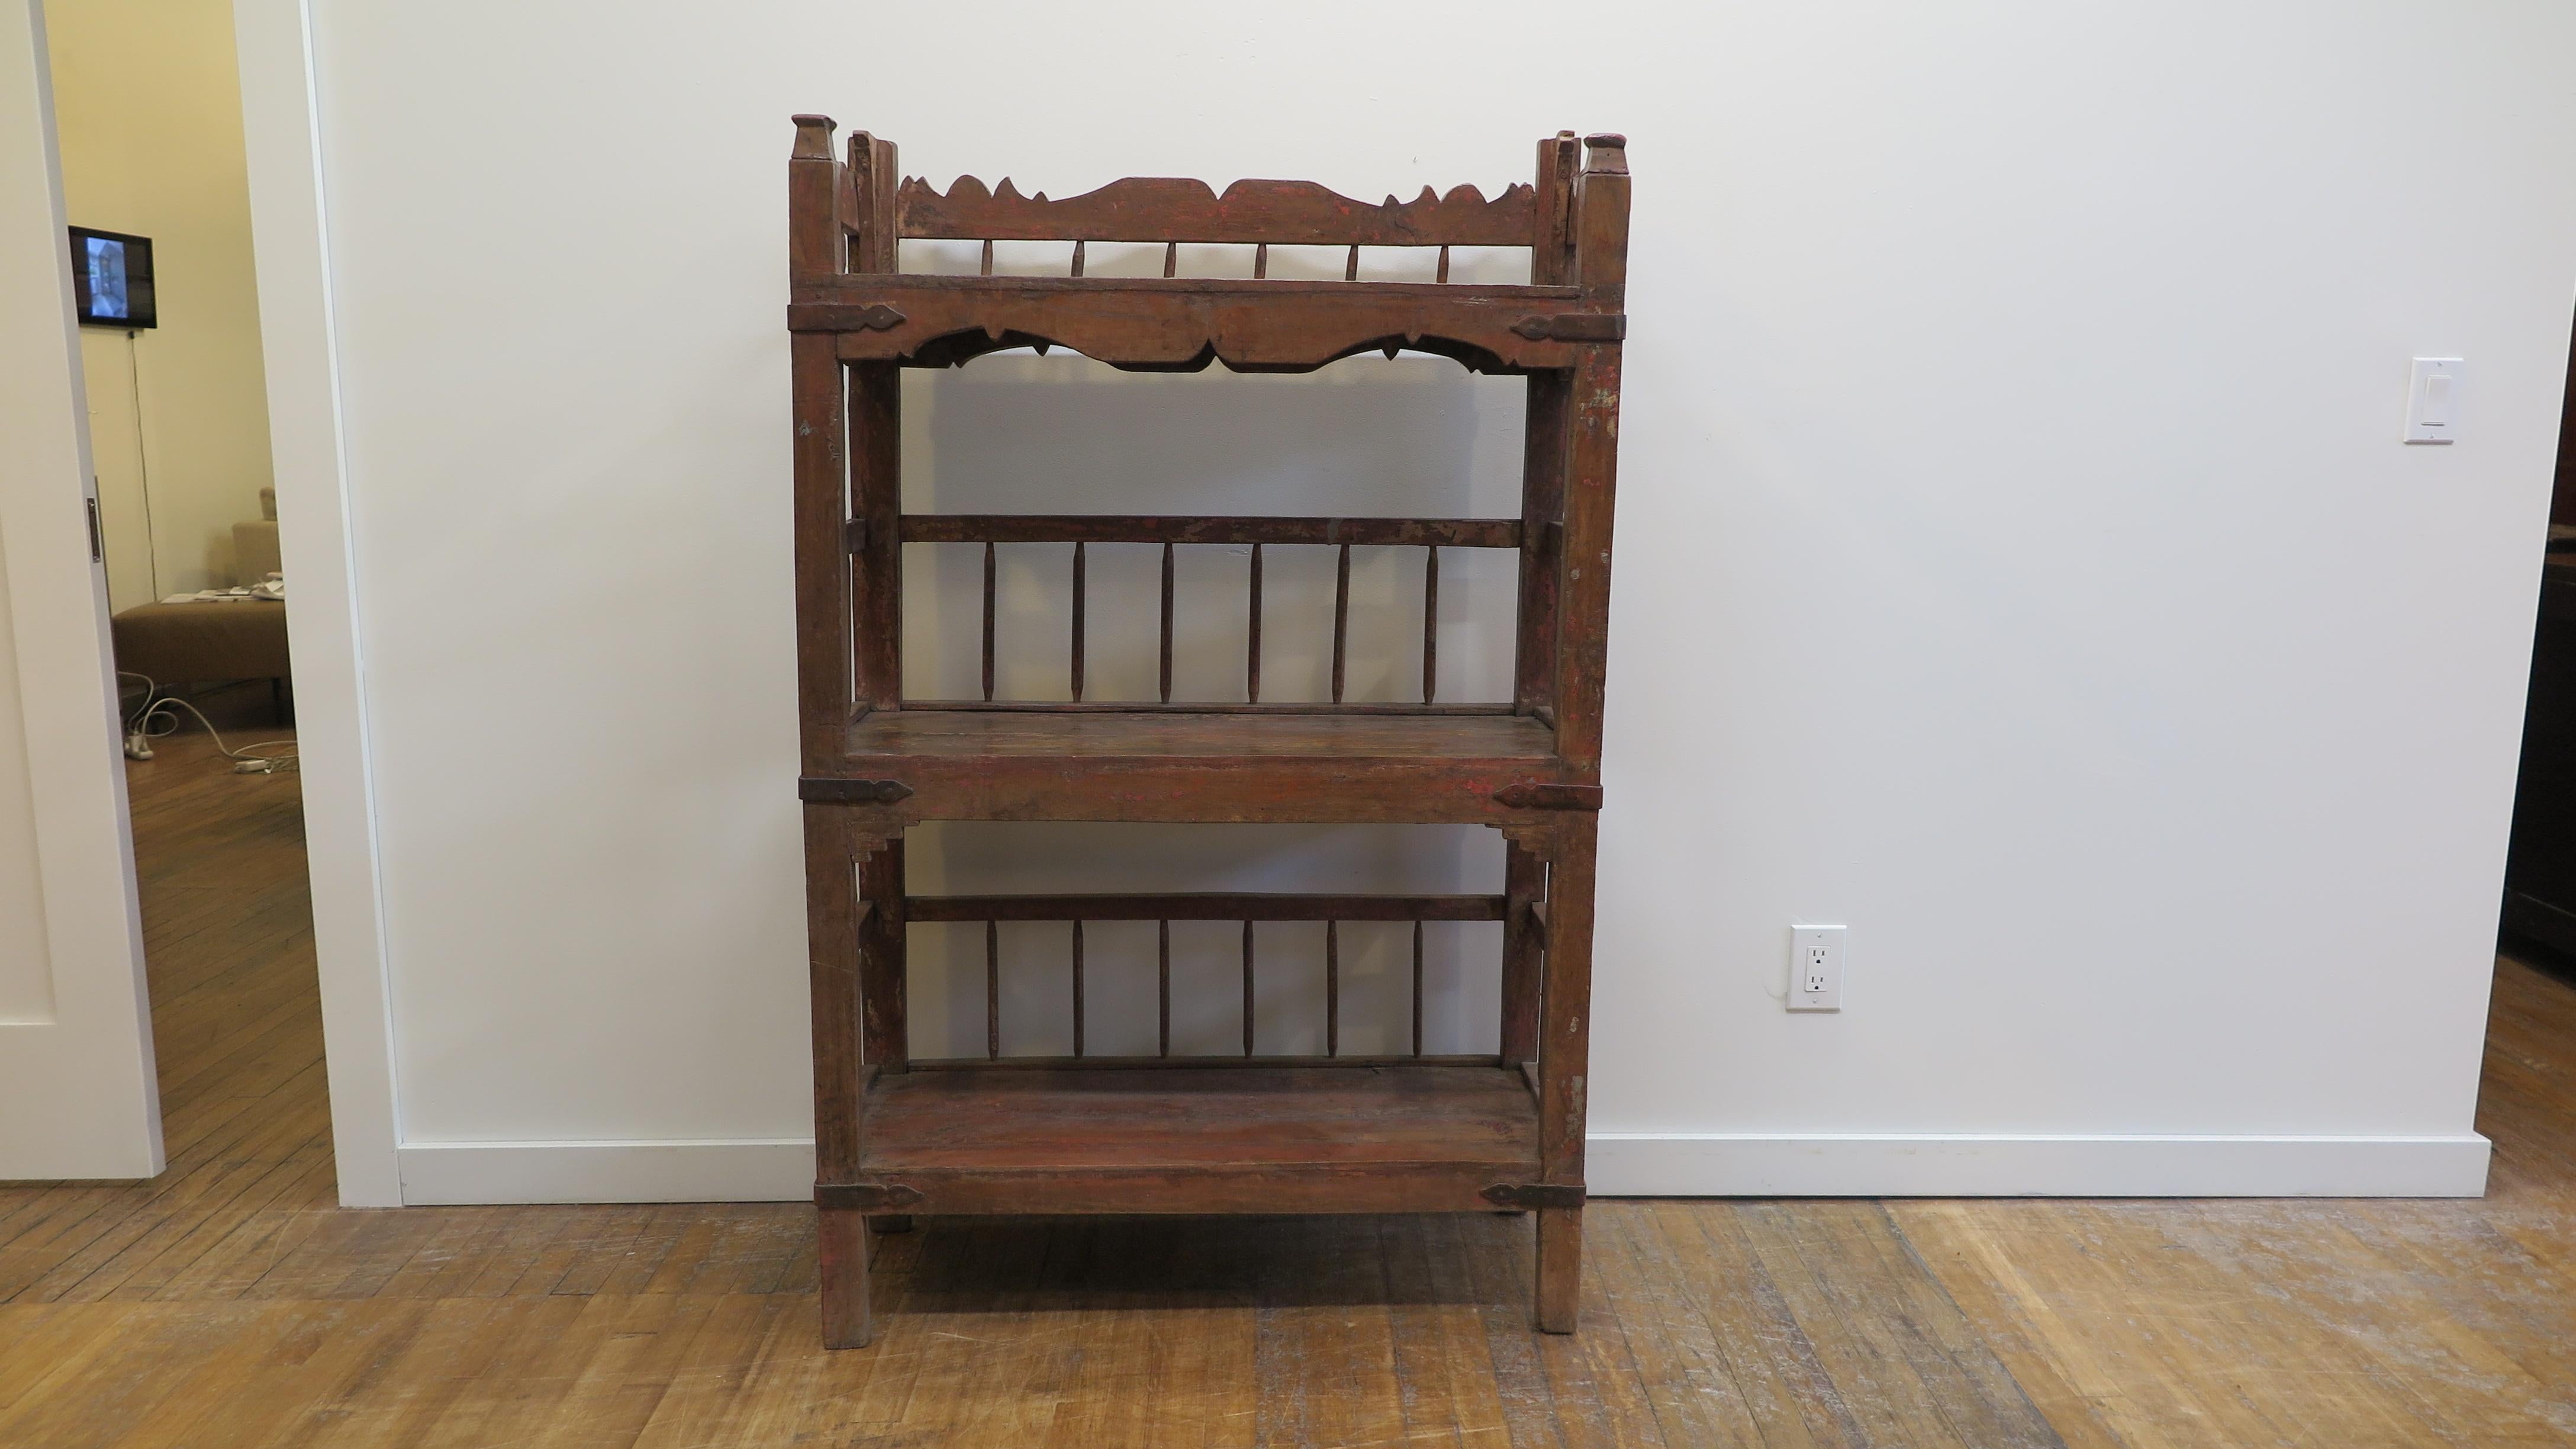 Rustic Bookcase, Etagere, Shelf. Wonderful Rustic Bookcase Shelfing piece having three shelf platforms with doweled back rail. Interesting piece with strong rustic patina. Sturdy for use, having an old repair pictured to the top back rail. A warm